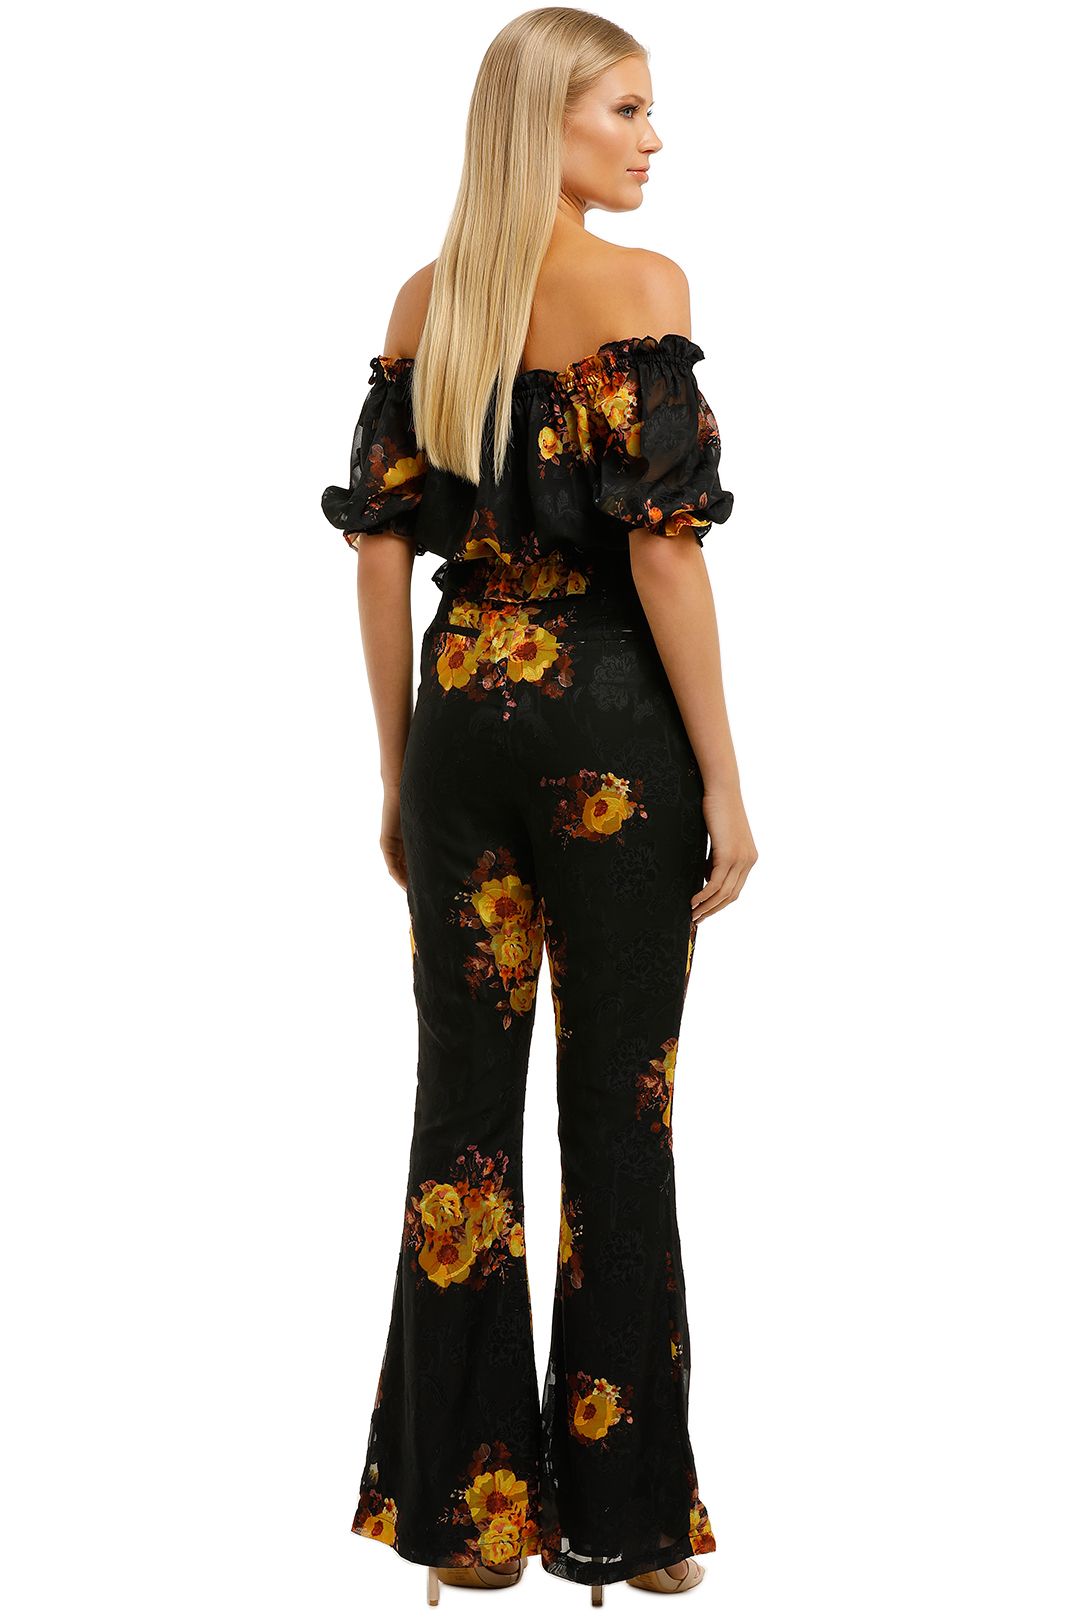 We-Are-Kindred-Ibiza-Top-and-Pant-Set-Noir-Sunflowers-Back